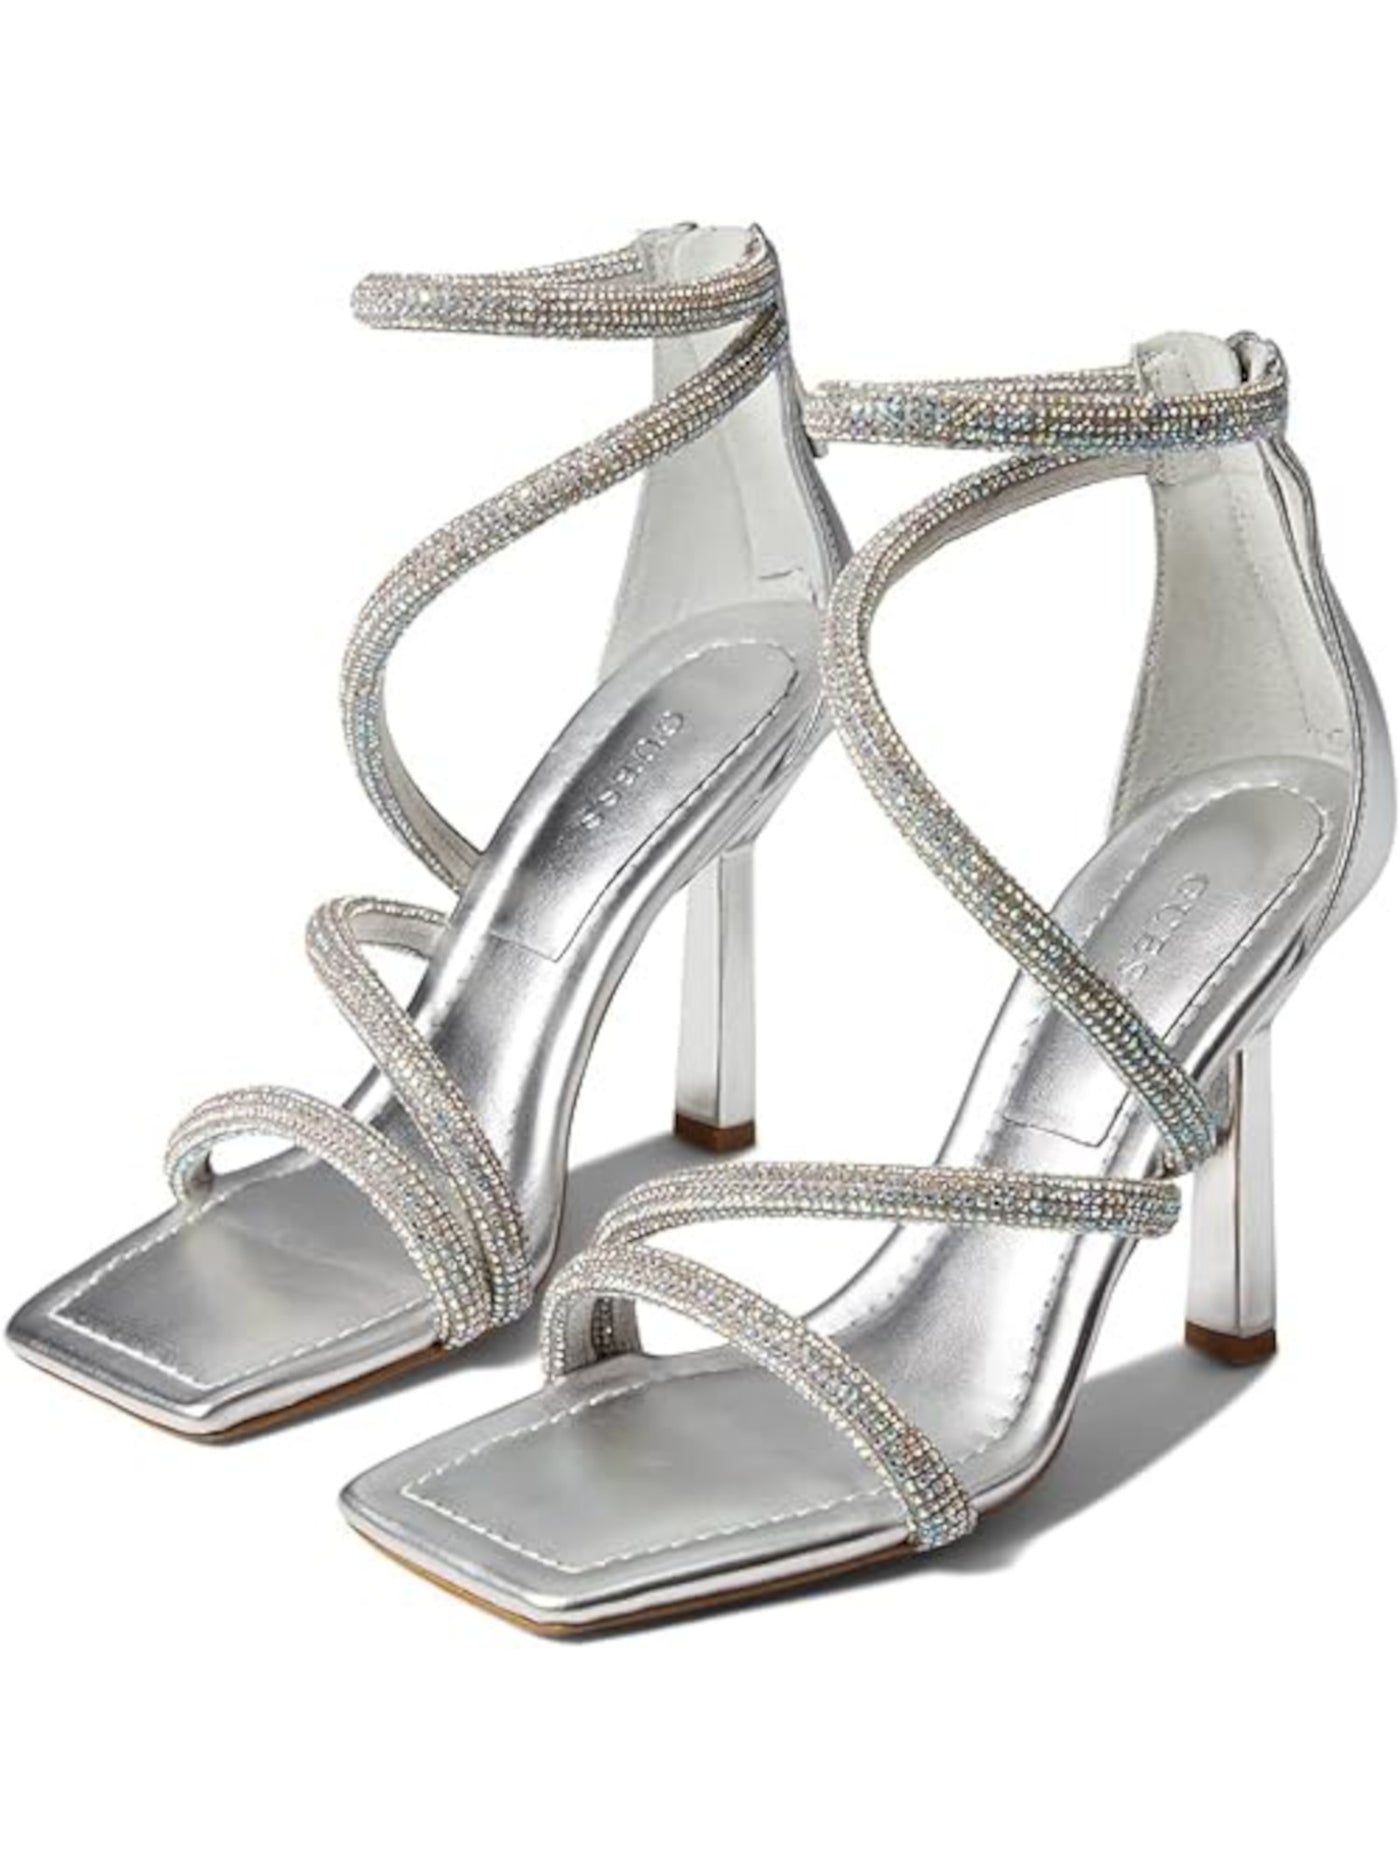 GUESS Womens Silver Padded Ankle Strap Embellished Lalali Square Toe Zip-Up Dress Heeled Sandal 9.5 M